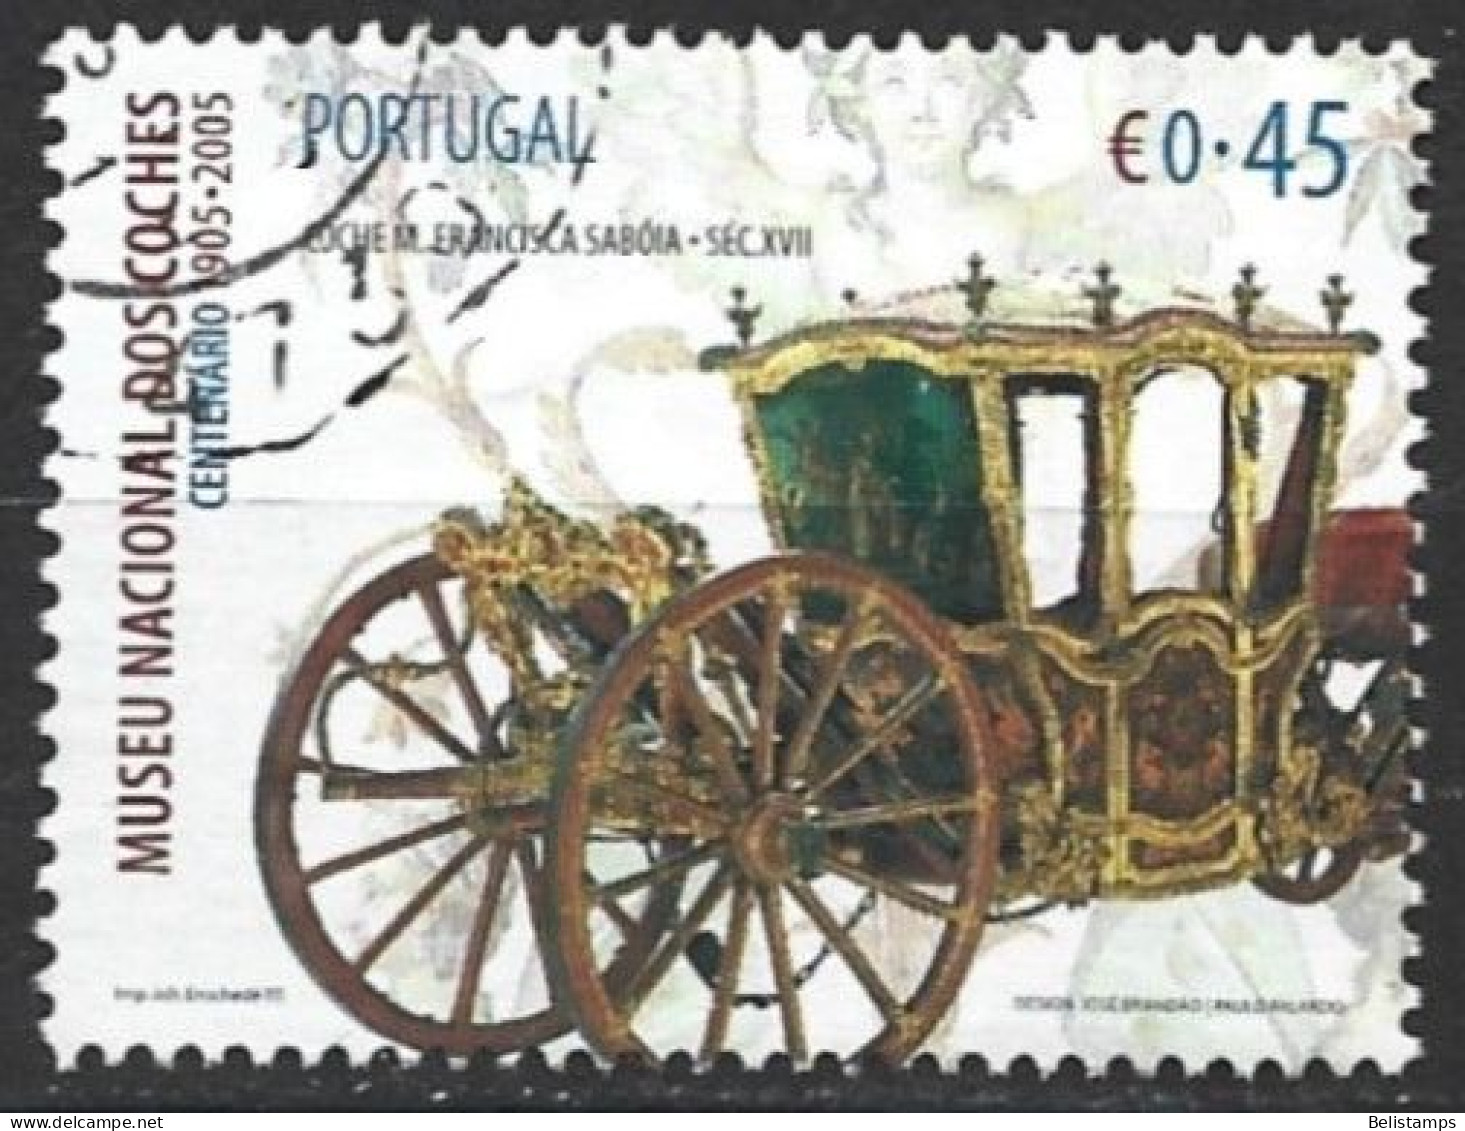 Portugal 2005. Scott #2715 (U) Coach Of Francisca Saboia, 17th Cent. - Used Stamps